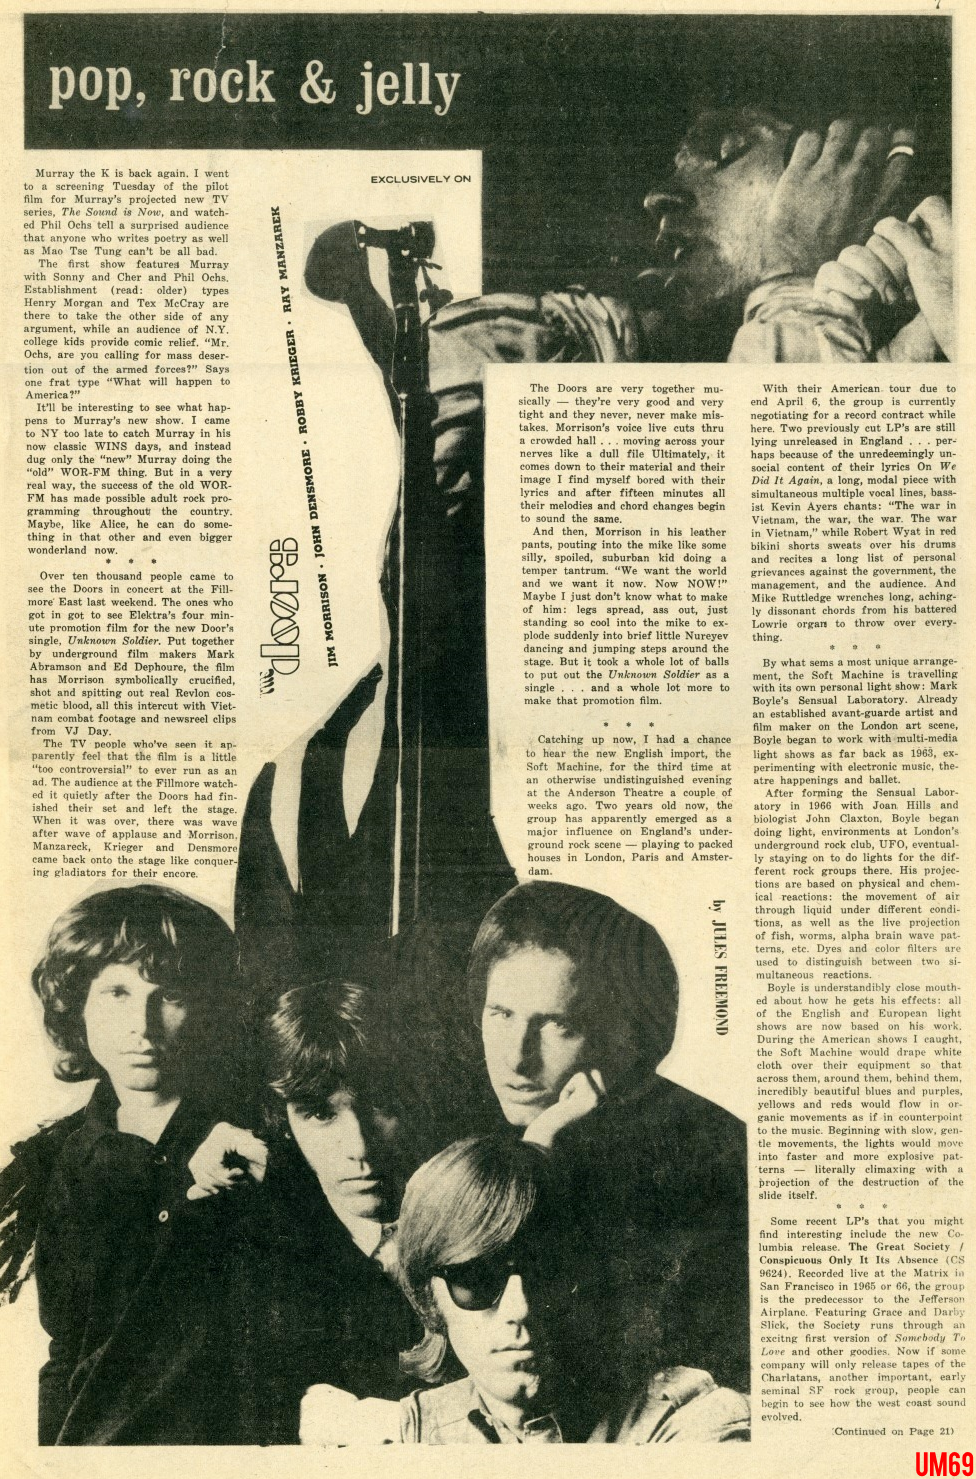 THE SOFT MACHINE Other Doors reviews